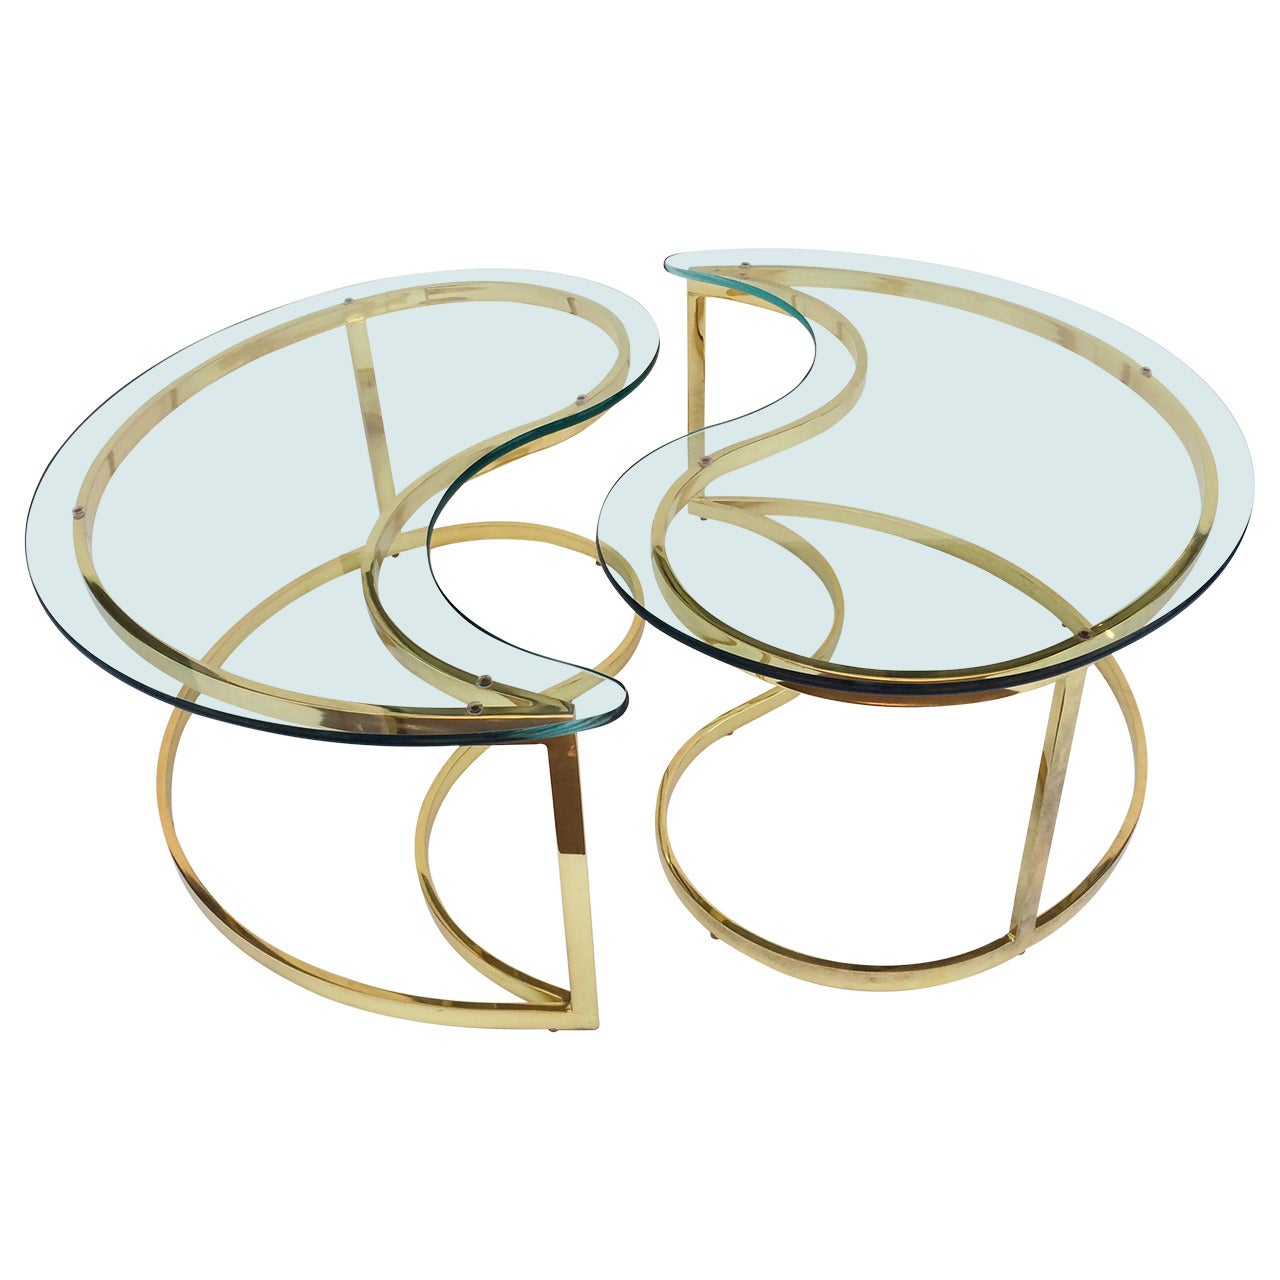 Polished Brass and Glass Cocktail or Coffee Tables Designed by Milo Baughman